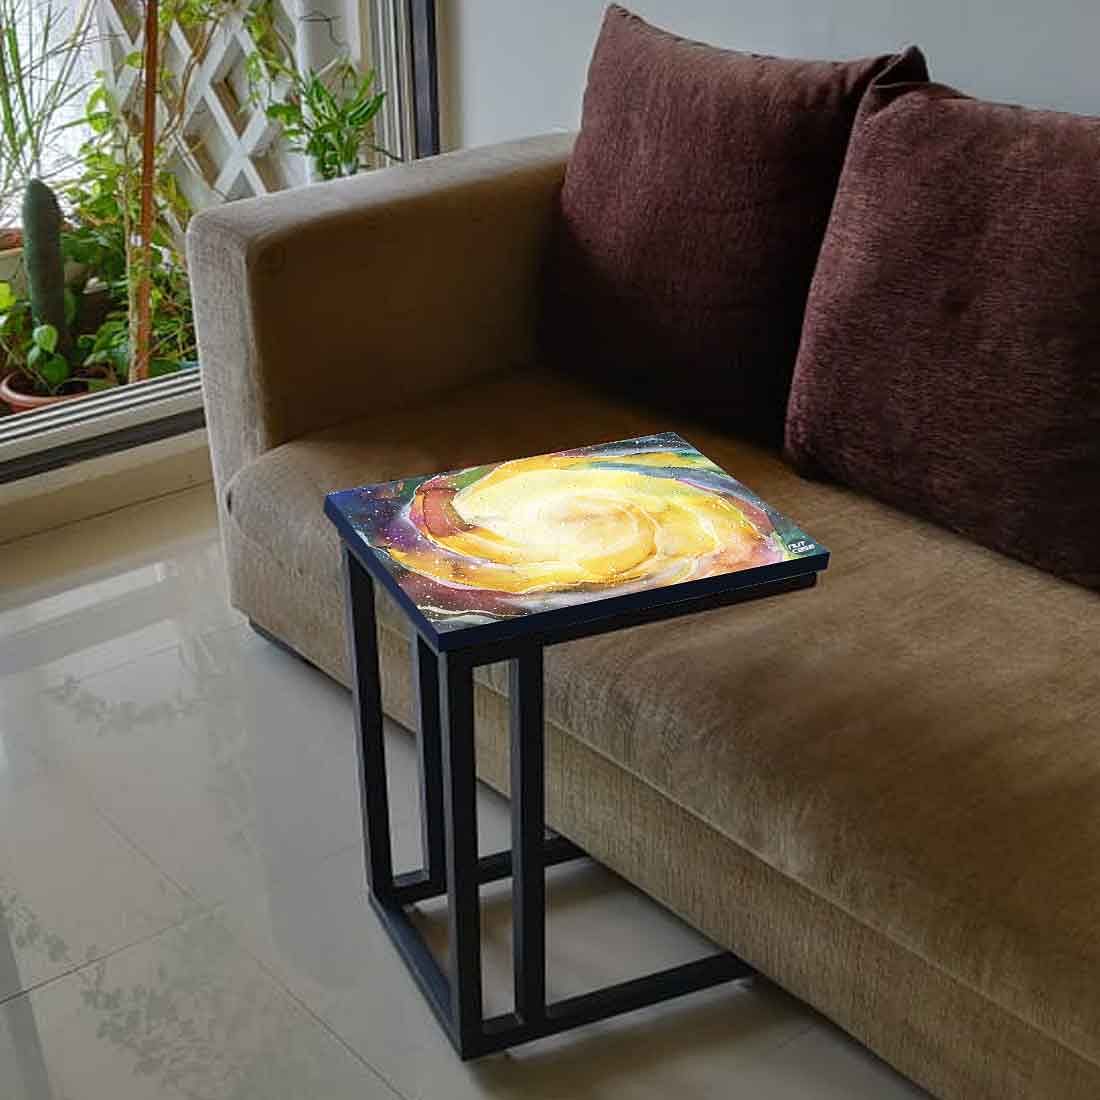 New C Shaped End Table - Space Yellow Watercolor Nutcase